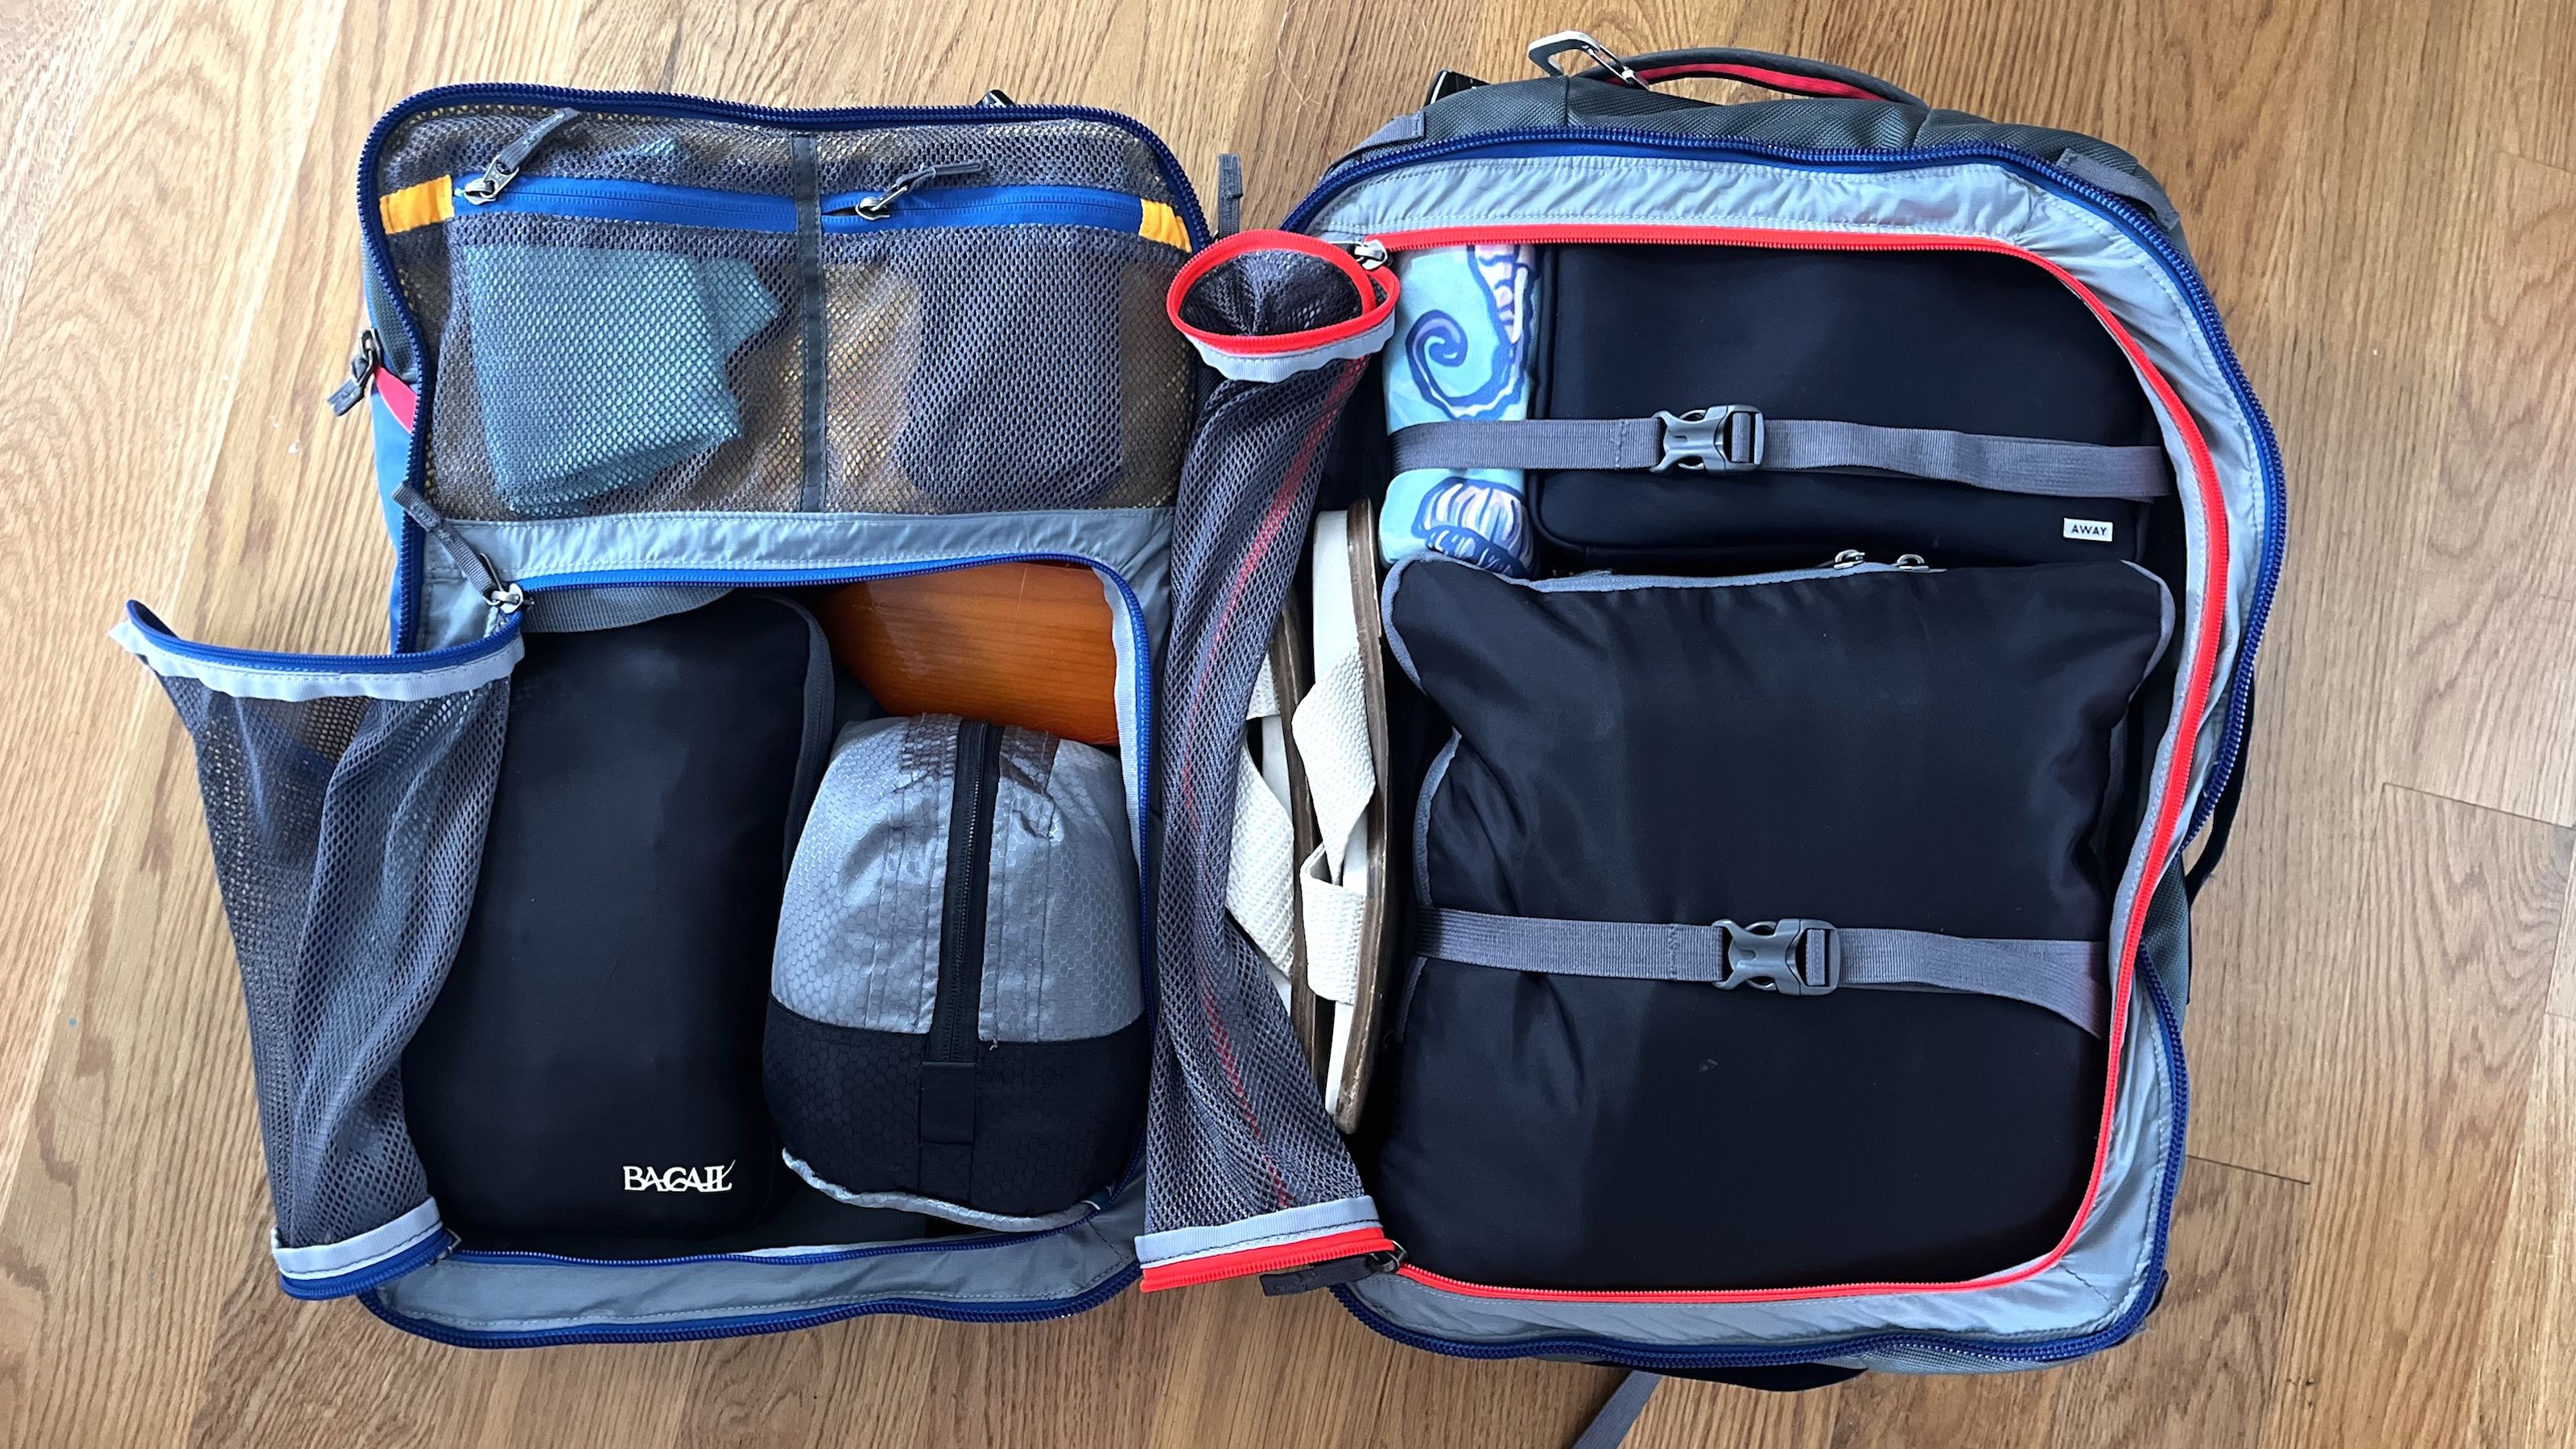 Woman reveals how she fits 4 days' worth of holiday clothes into tiny carry  on bag